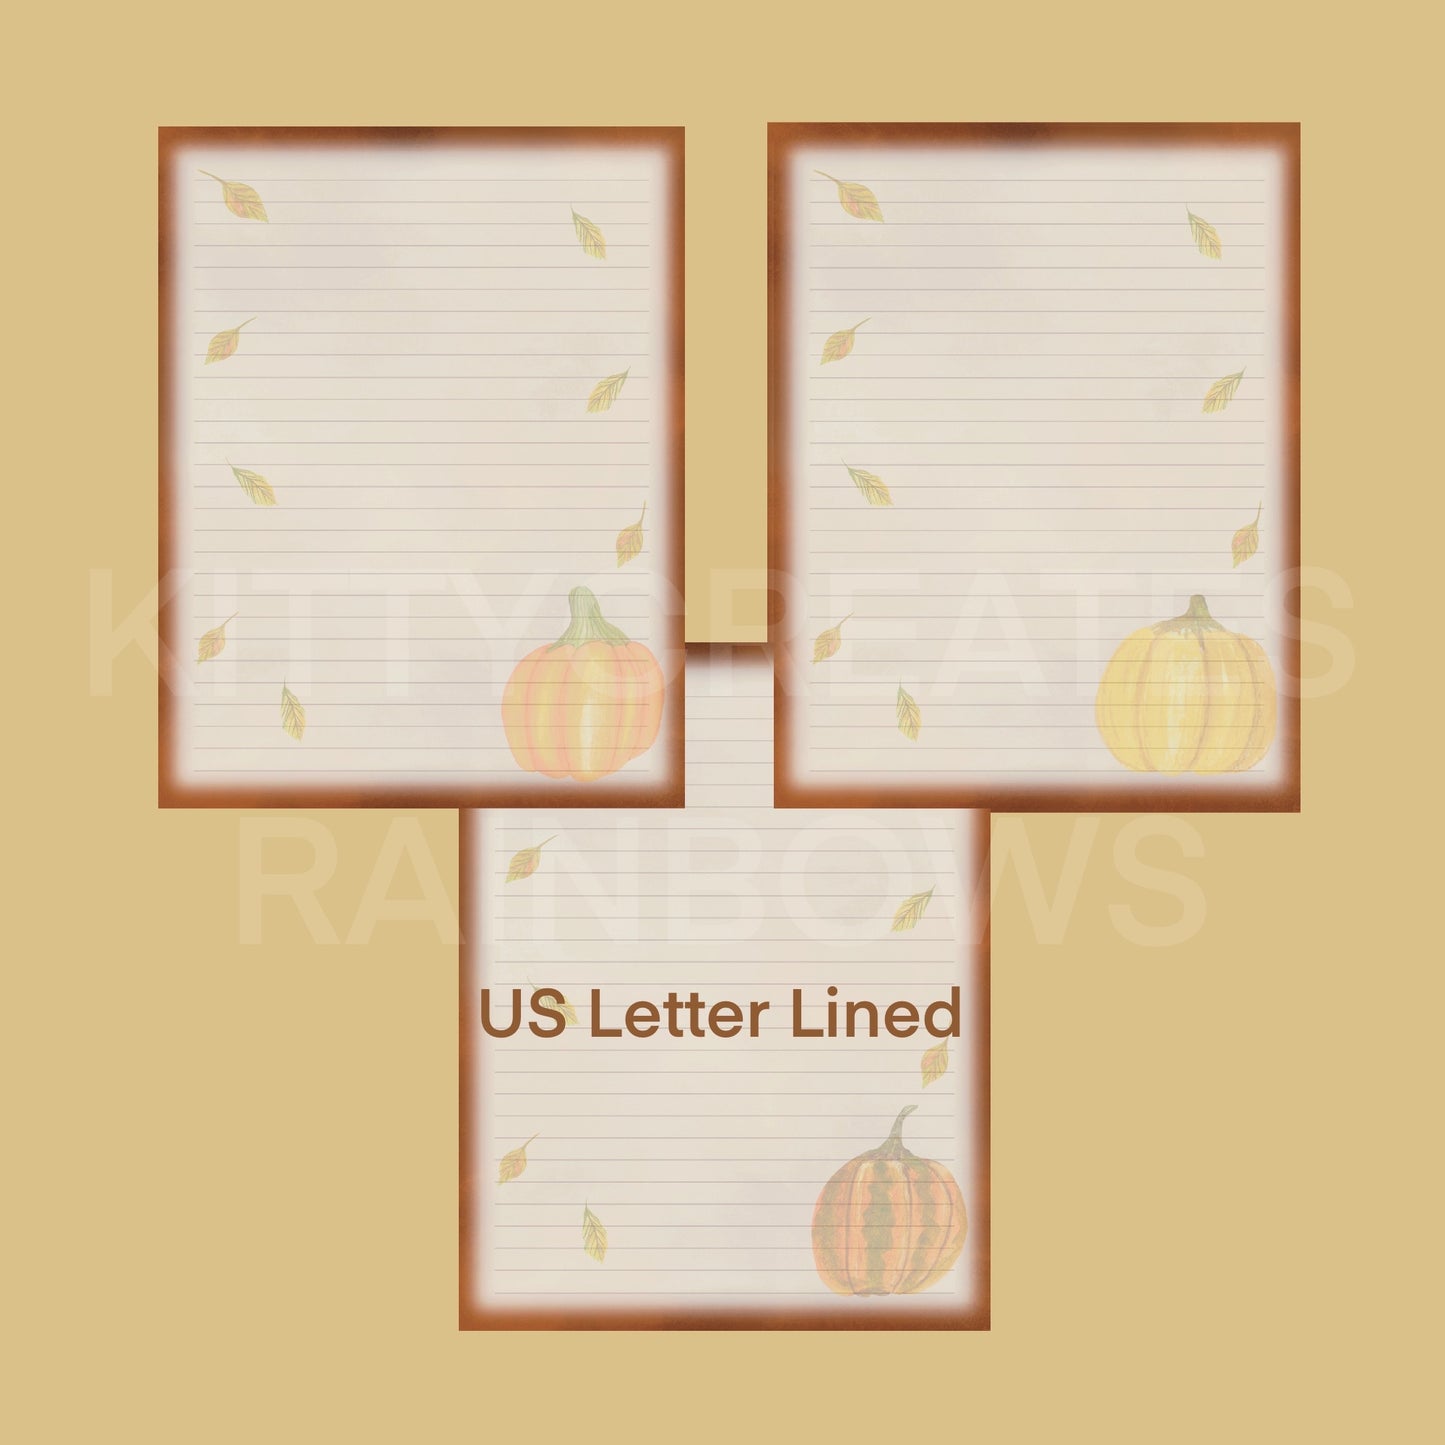 3 images of Fall Forage Pumpkin Writing Papers on a light brown yellow background and a white watermark saying Kitty Creates Rainbows. Text on bottom of image also says in brown text US Letter Lined